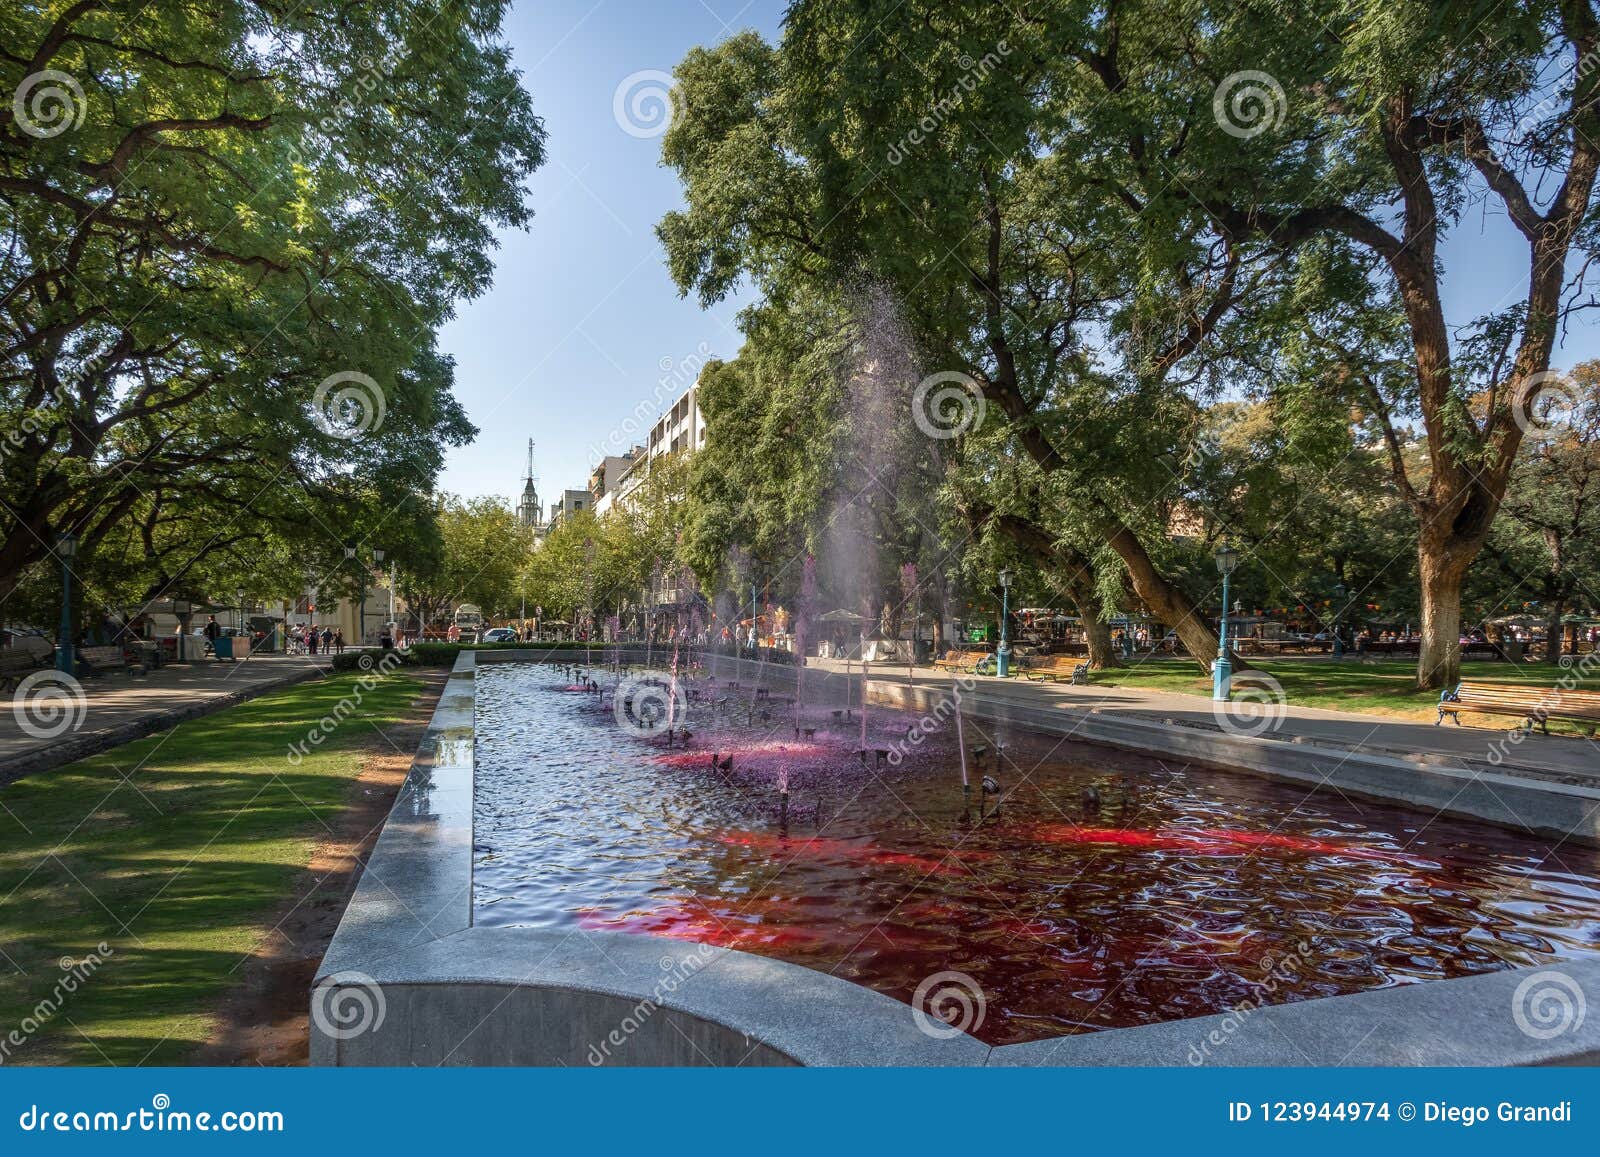 plaza independencia independence square fountain with red water like wine - mendoza, argentina - mendoza, argentina